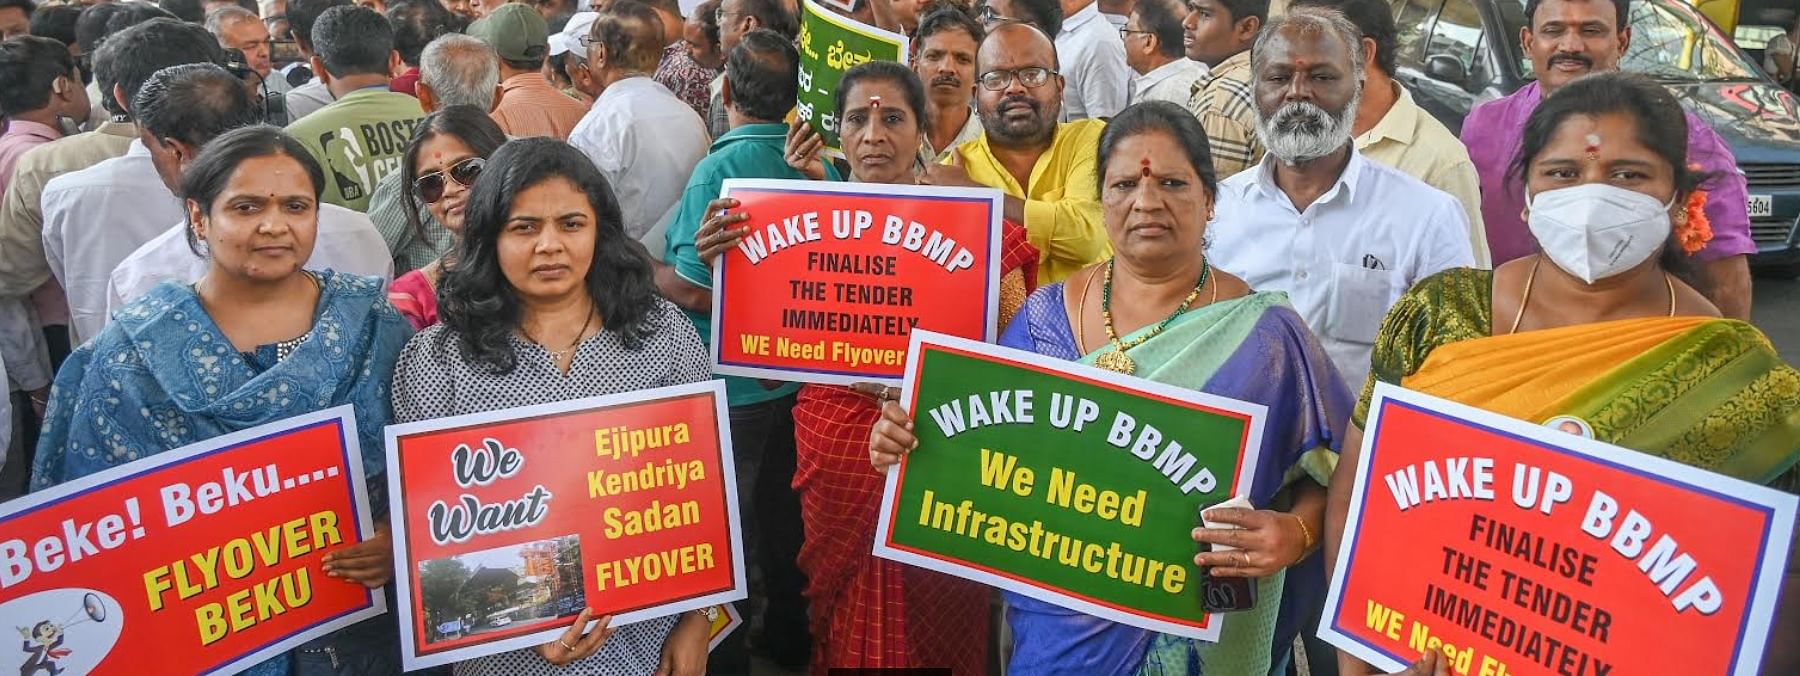 A protest to demand the completion of the long-pending Ejipura flyover was in held in February.